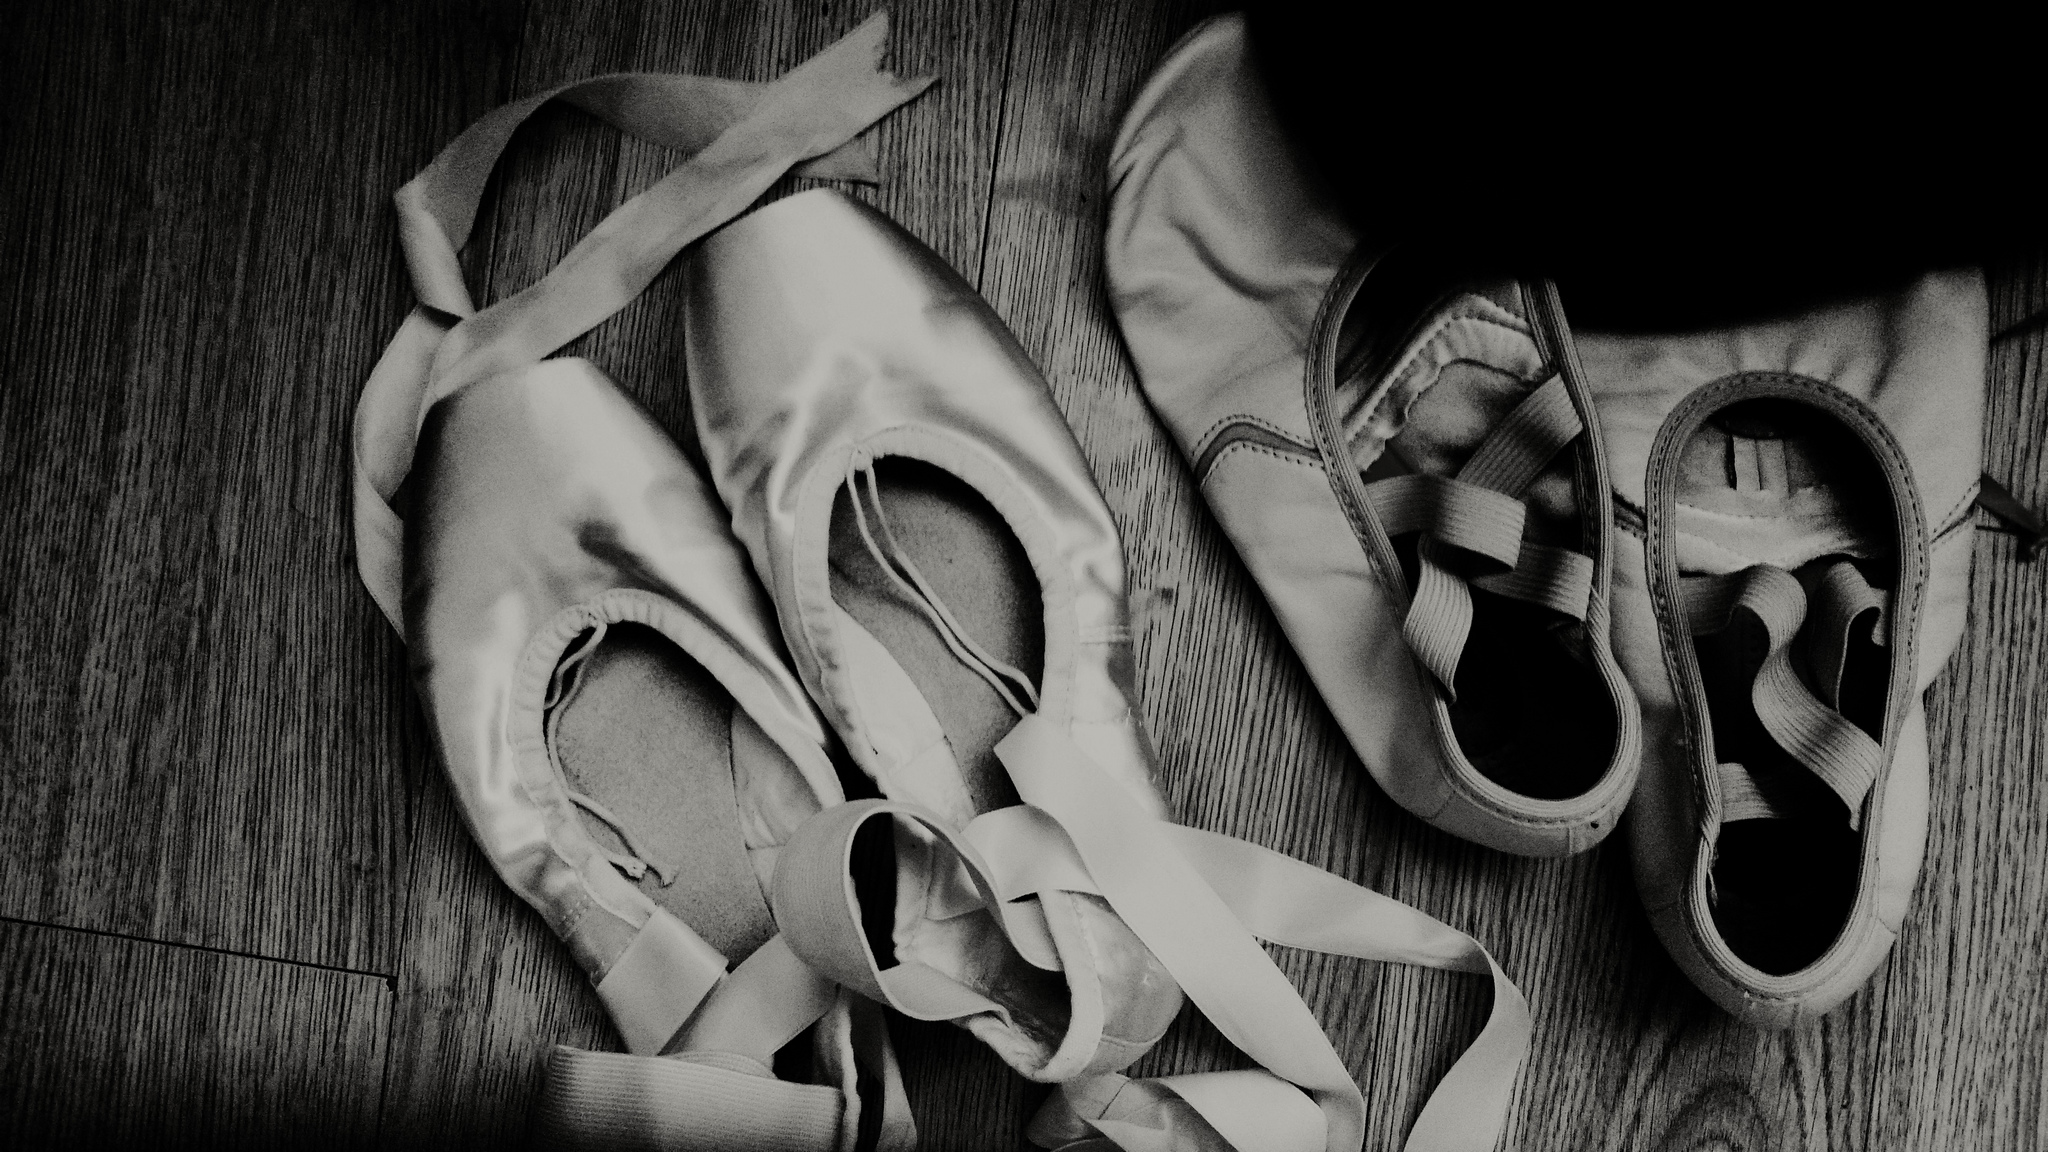 Black and white photograph demi-pointe shoes on left, MDM flats on the right.